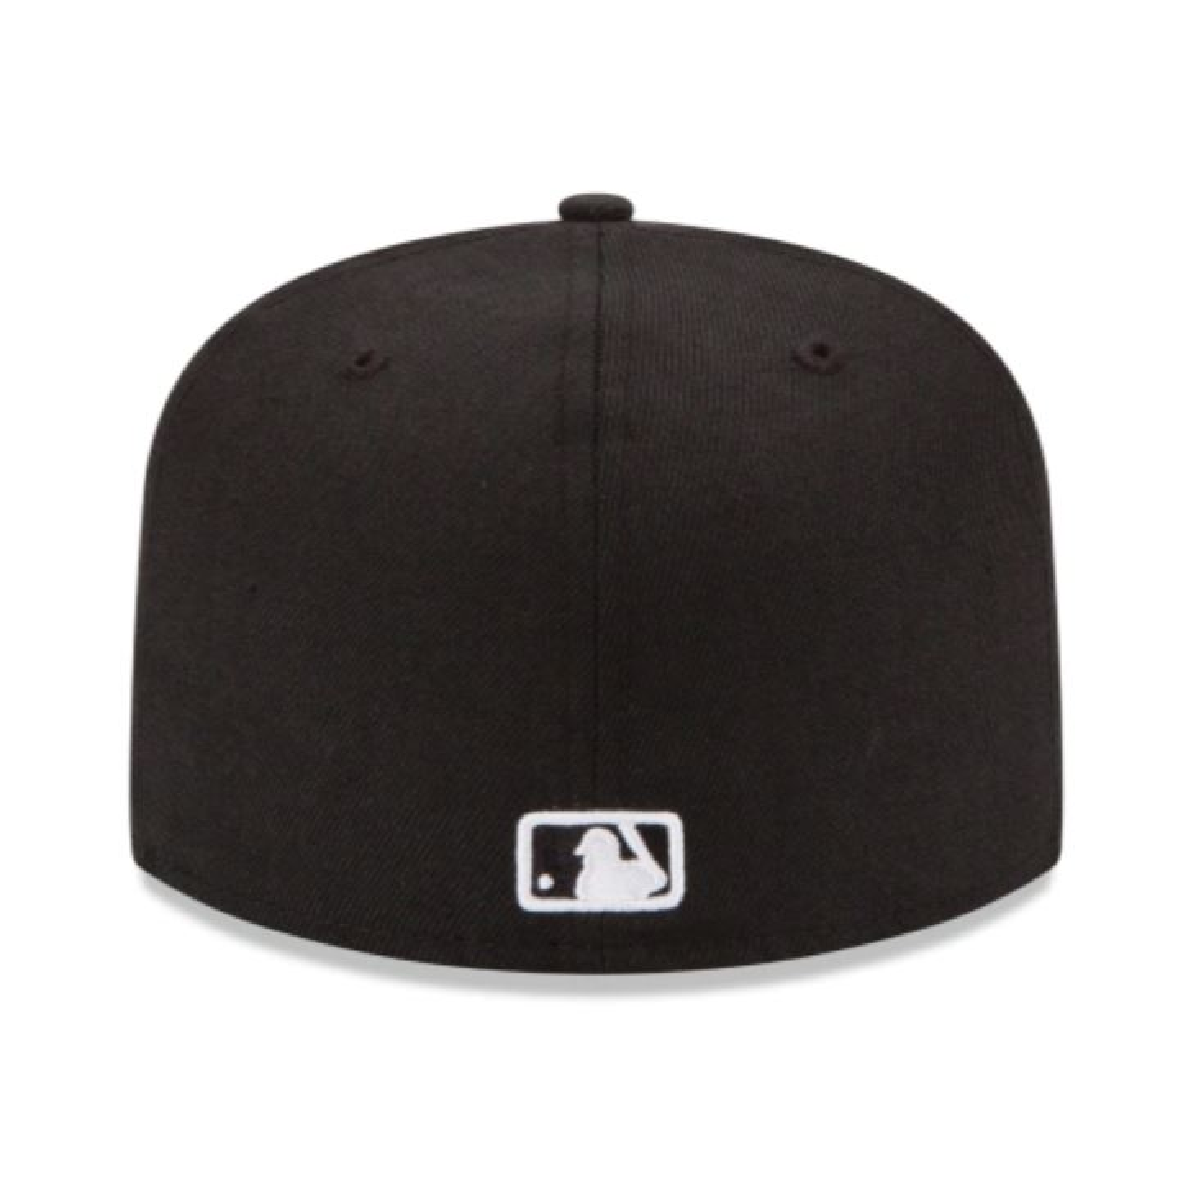 DETROIT TIGERS NEW ERA HOME AUTHENTIC COLLECTION 59FIFTY FITTED-ON-FIELD COLLECTION-Black and white